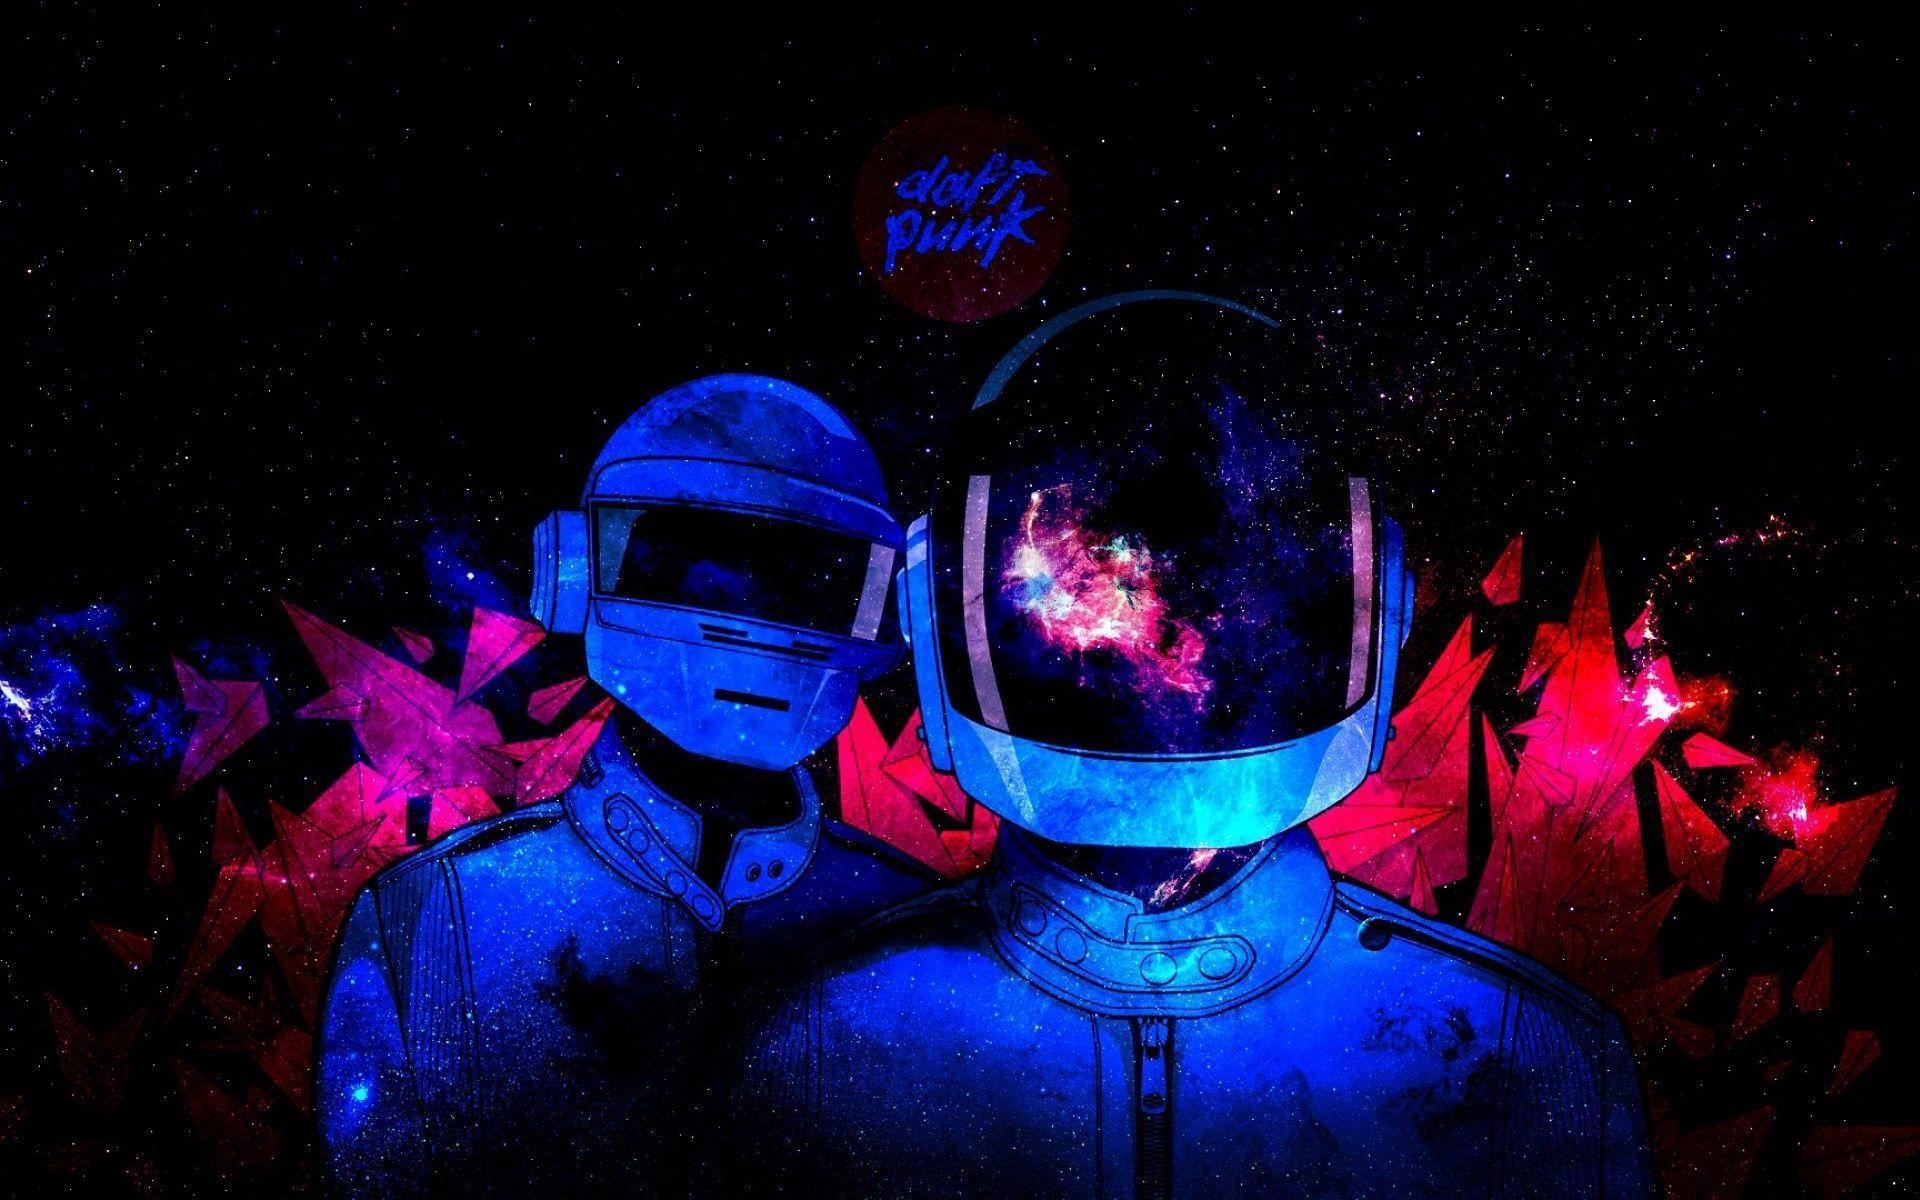 Outer Space Daft Punk Electronic Wallpaper Wide or HD. Artistic